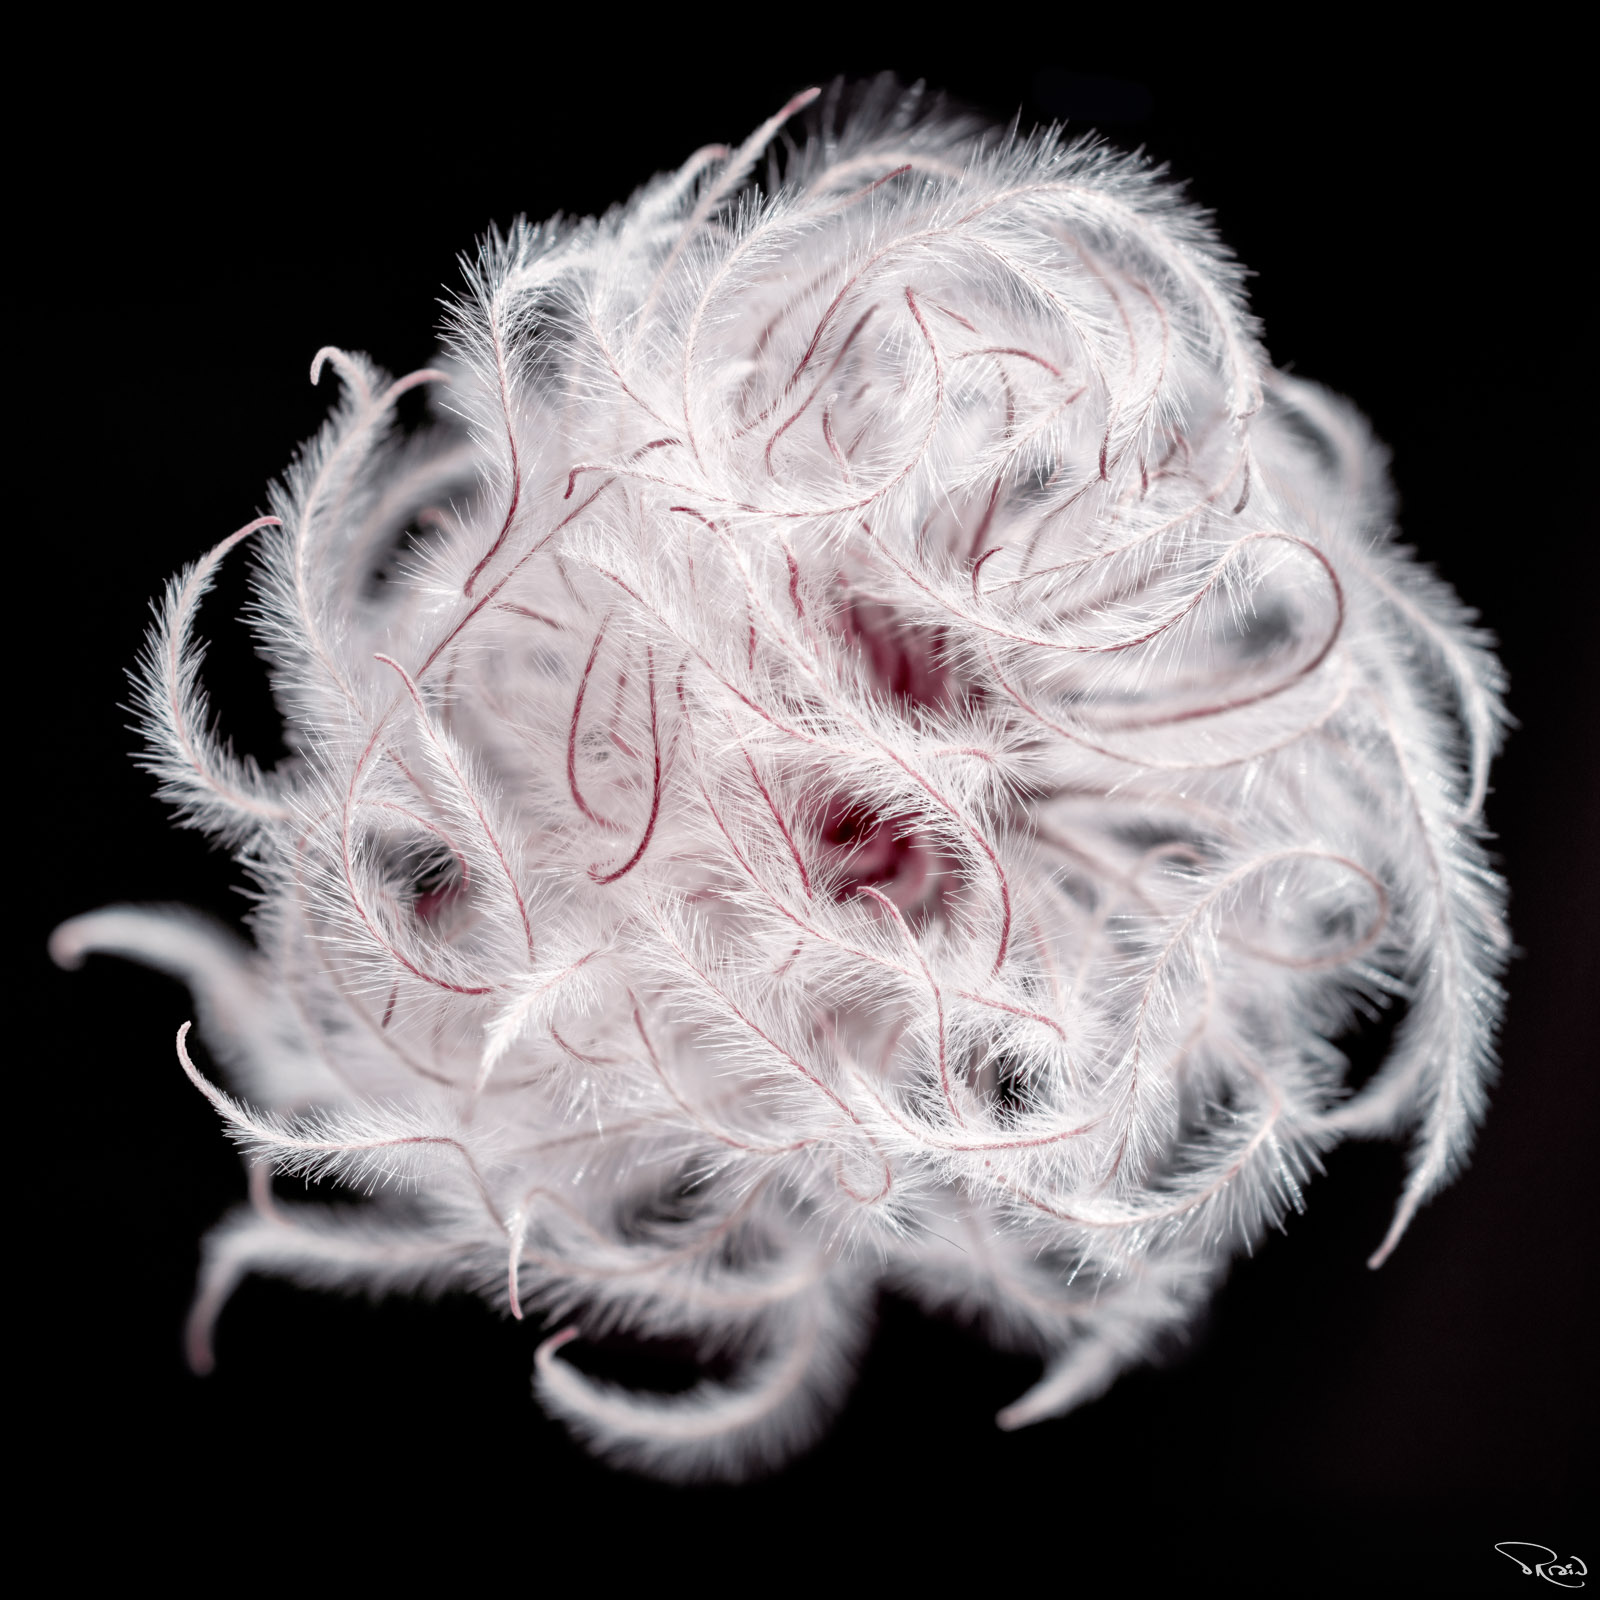 A super close up image of a fluffy dried clematis seed looks like swirling miniature feathers.